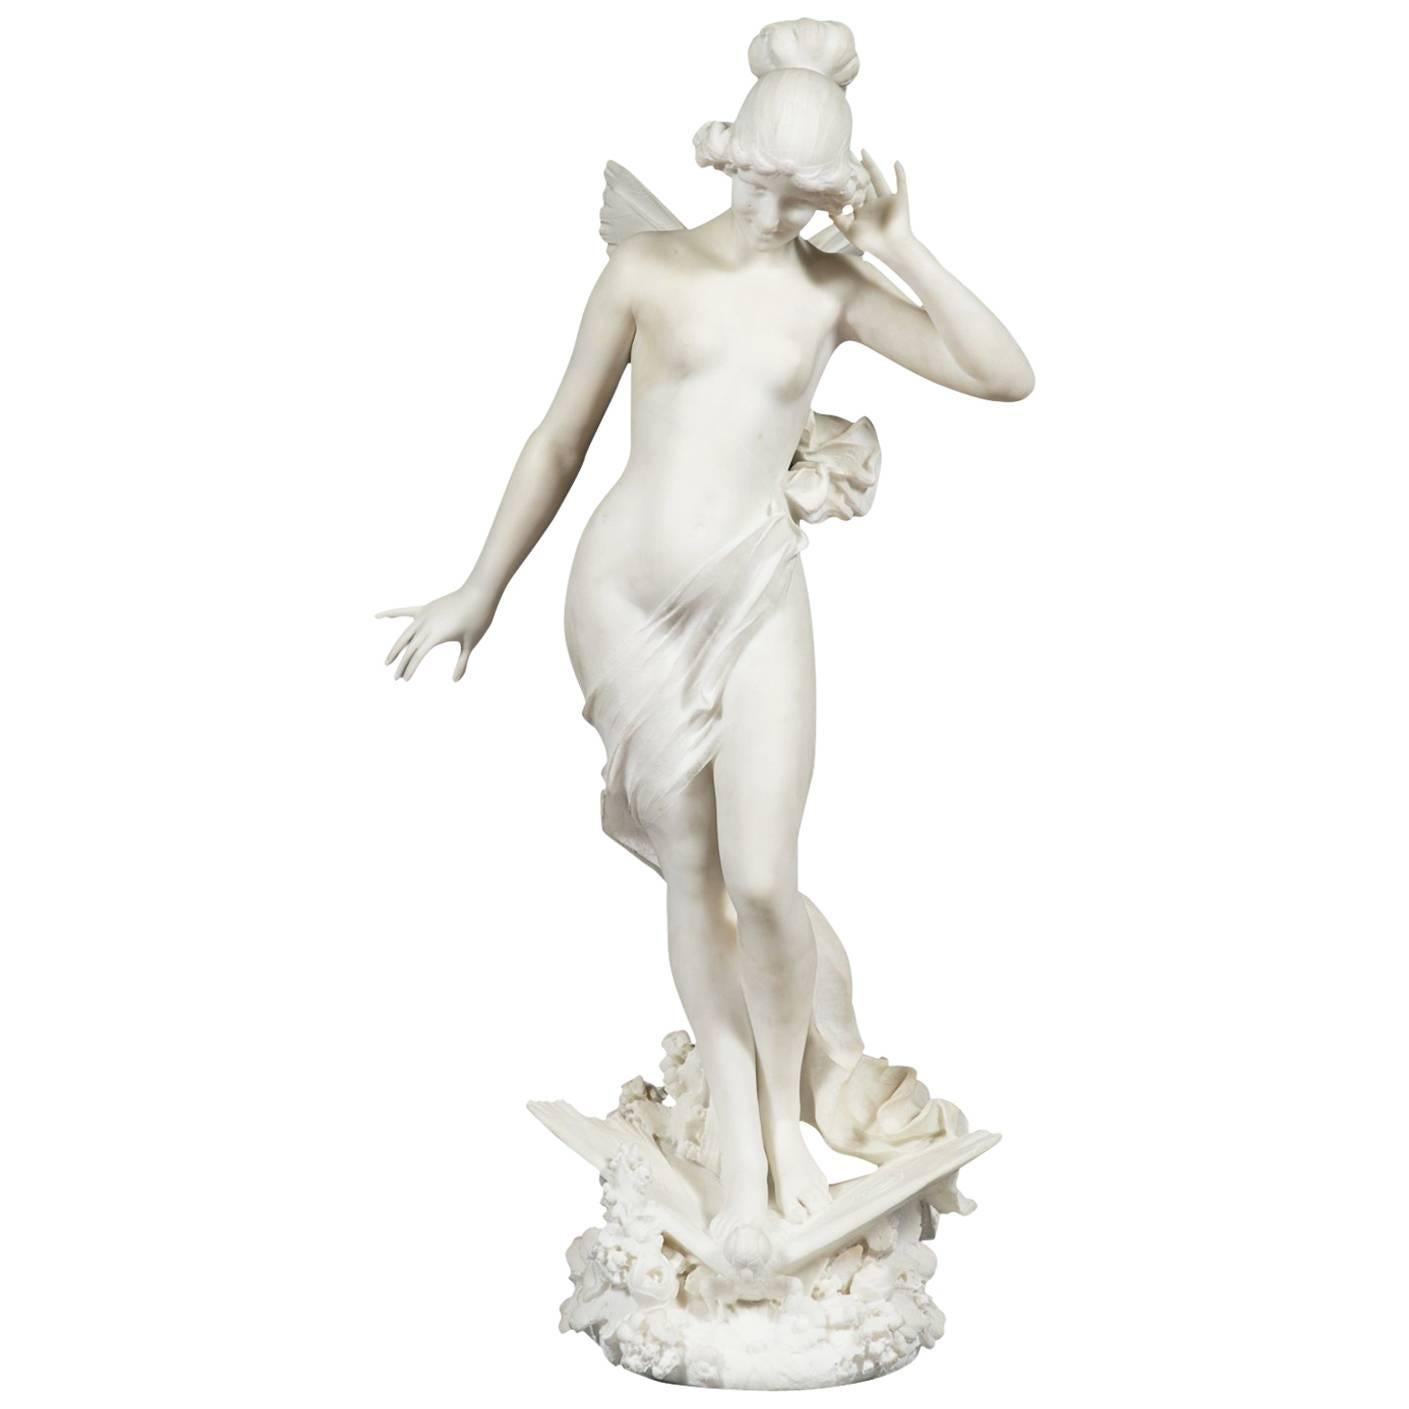 19th Century Italian Marble Figure of a Nymph on a Butterfly A. Batacchi